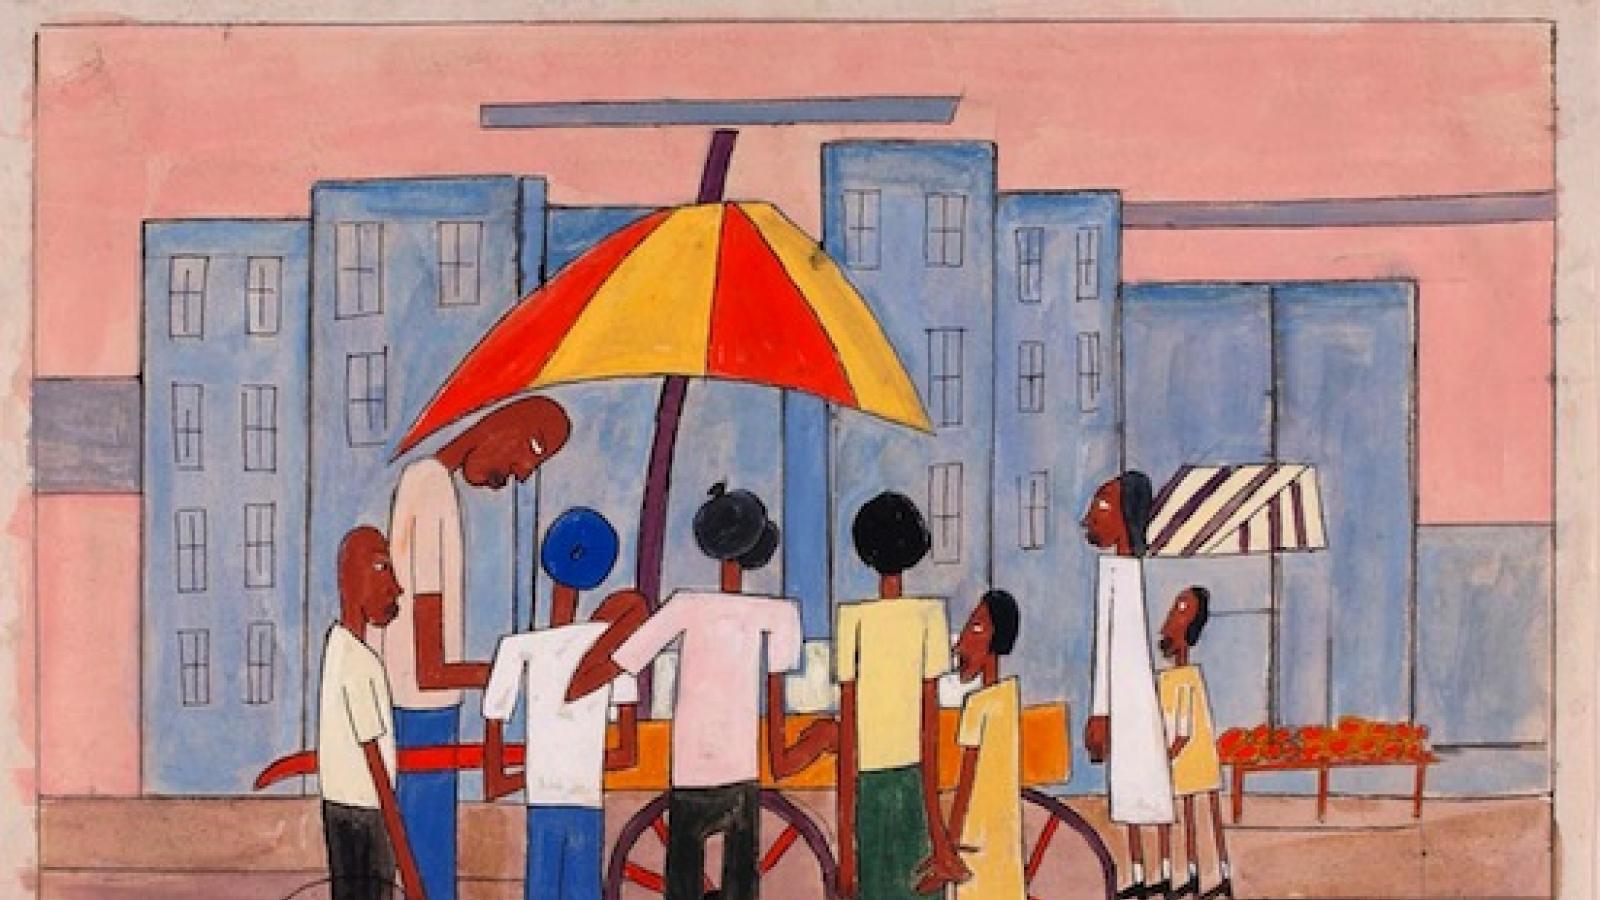 Painting of African-American children around an ice-cream cart manned by an African-American man against a background of blue skyscrapers